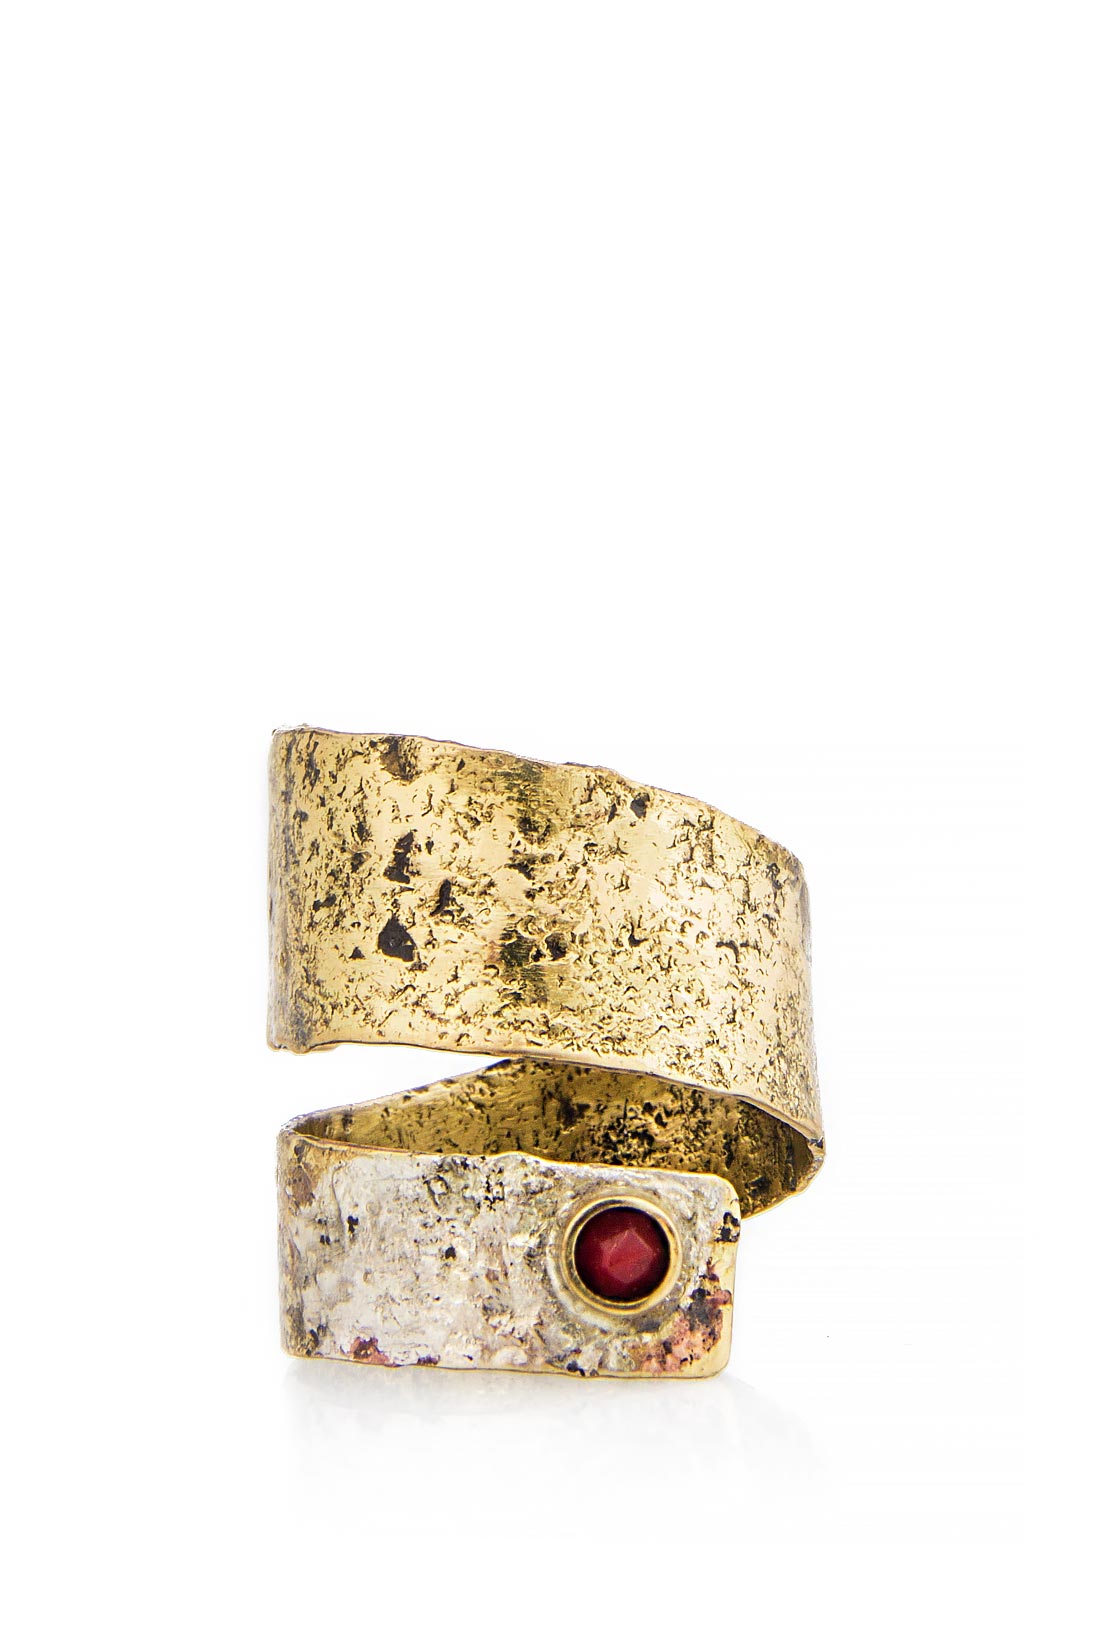 Silver and brass ring with red coral stone Eneada image 0